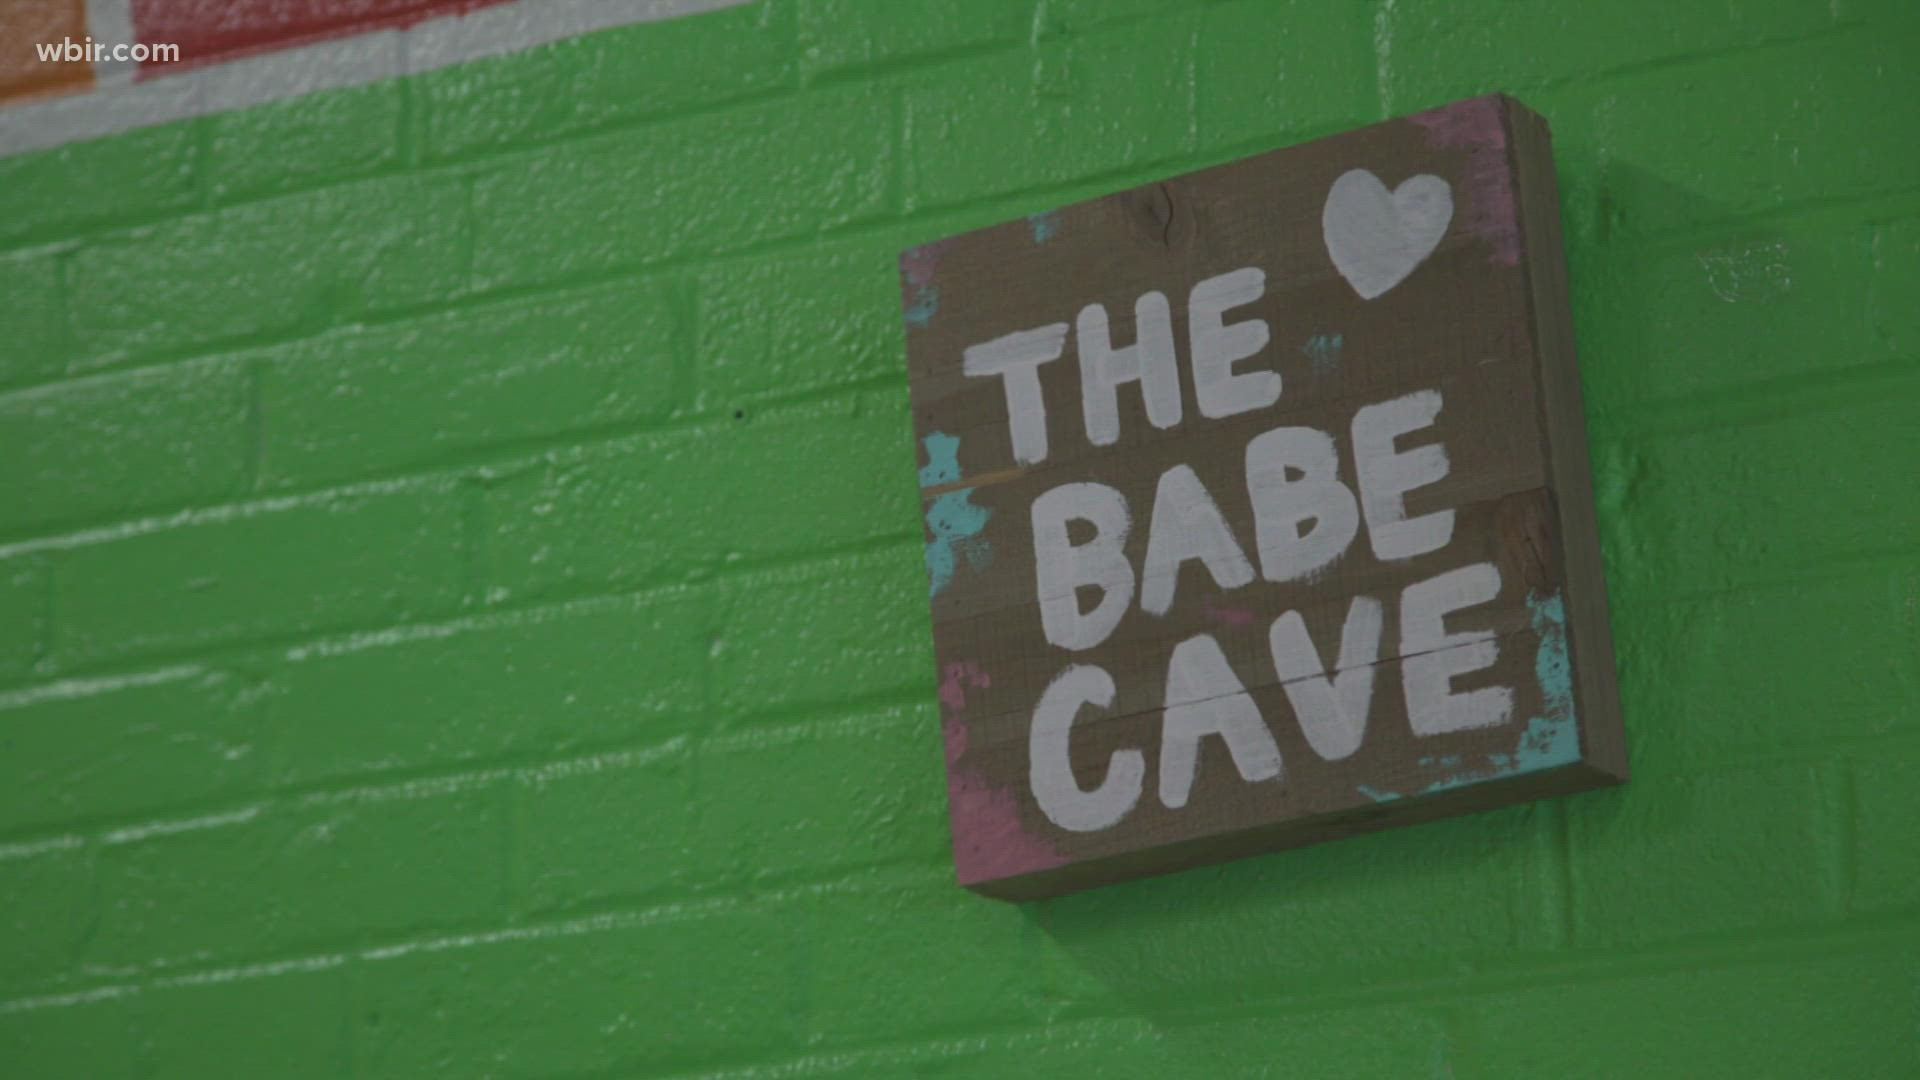 Called "The Babe Cave", this hangout spot is for the elderly ladies of Wesley House who were excited to see the spot re-open after 16 months.